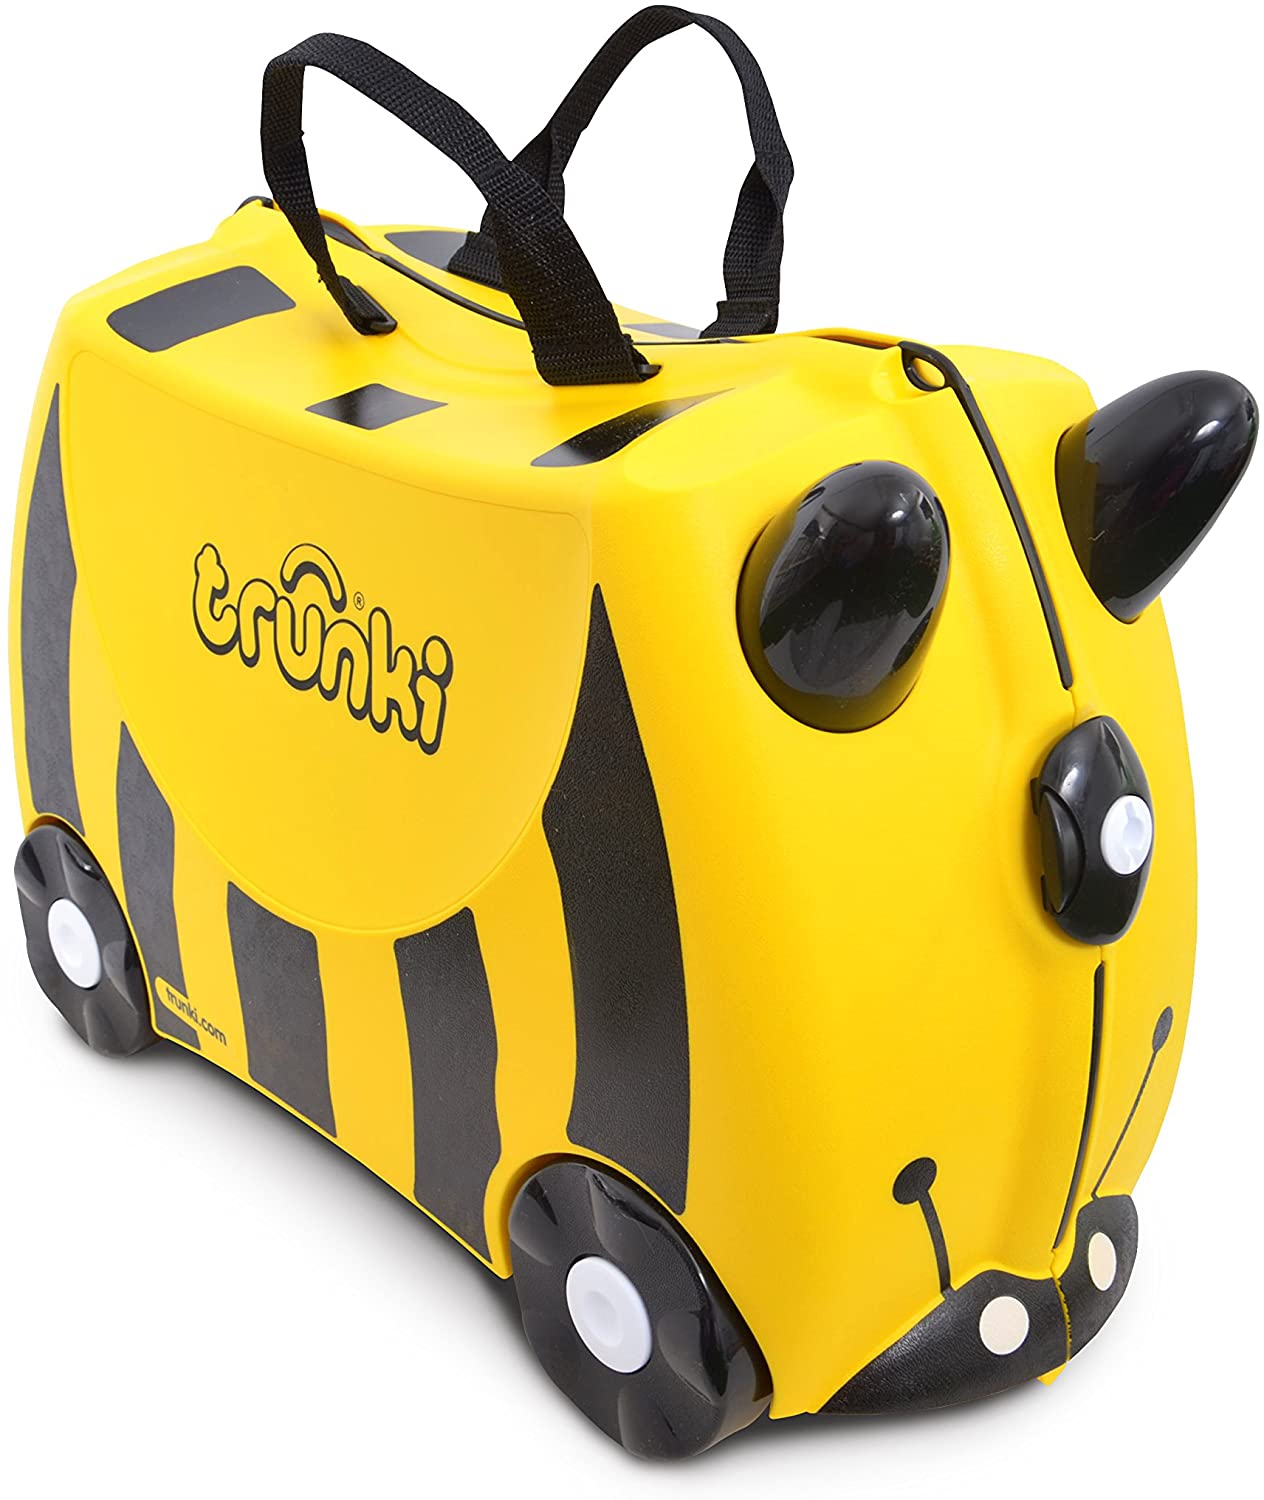 Trunki Original Ride-On Safety Certified Kid’s Luggage